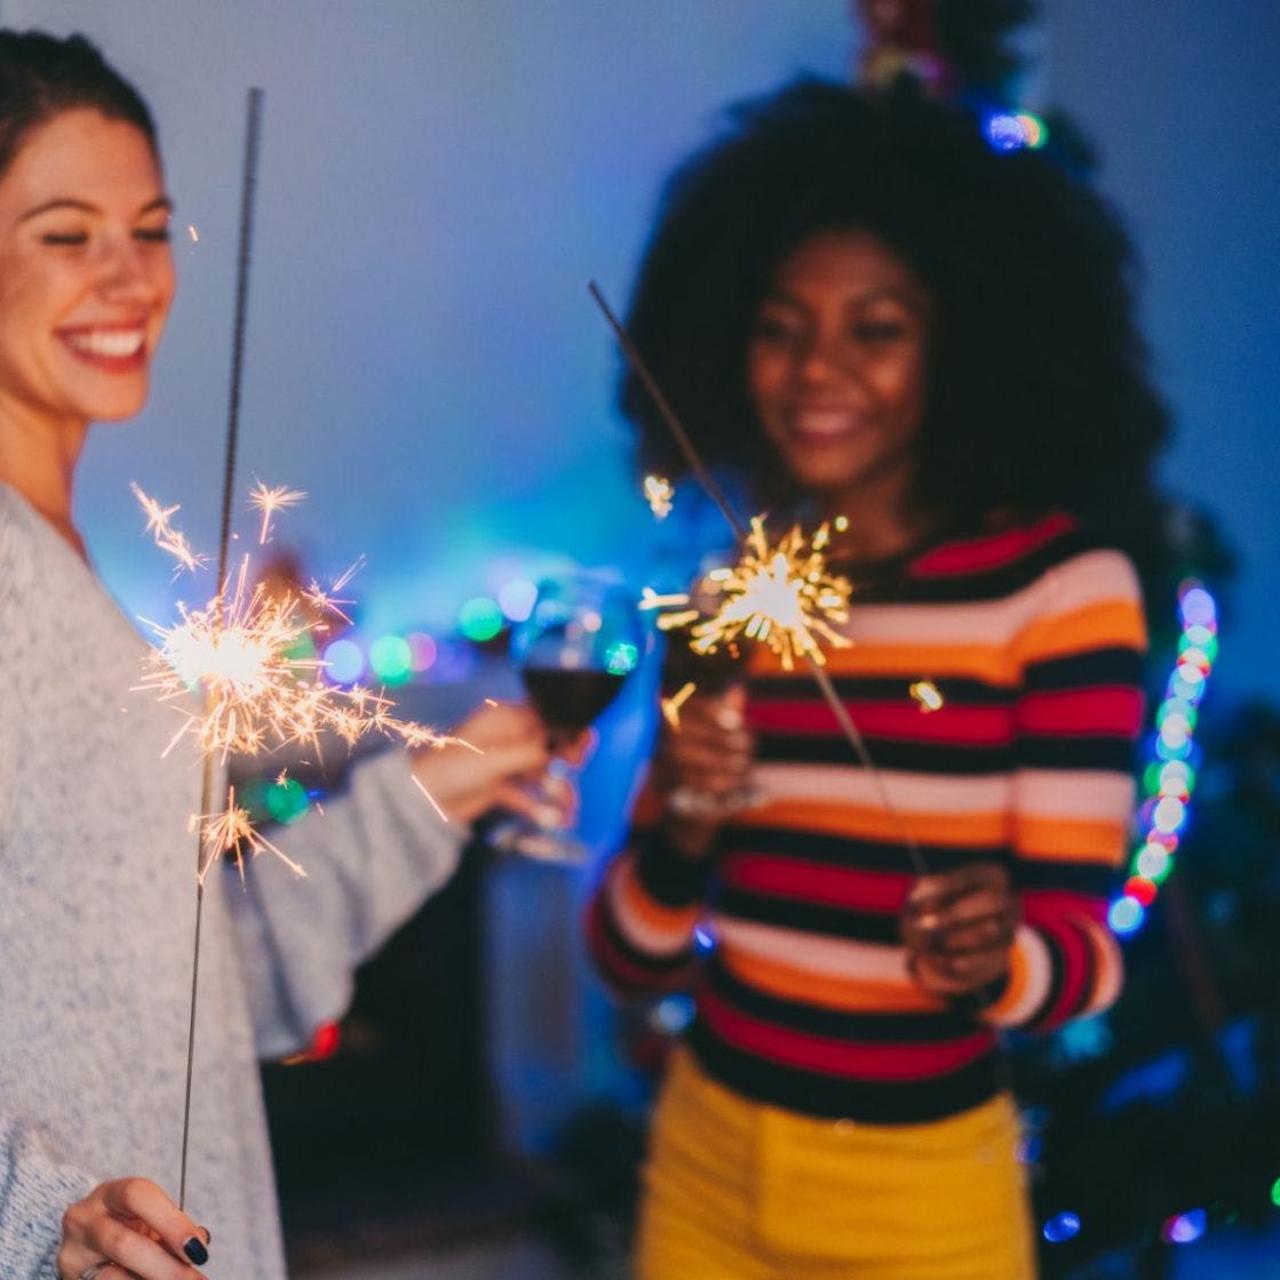 Did COVID Ruin Your New Year's Plans? Celebrate at Home and Have Fun Doing It